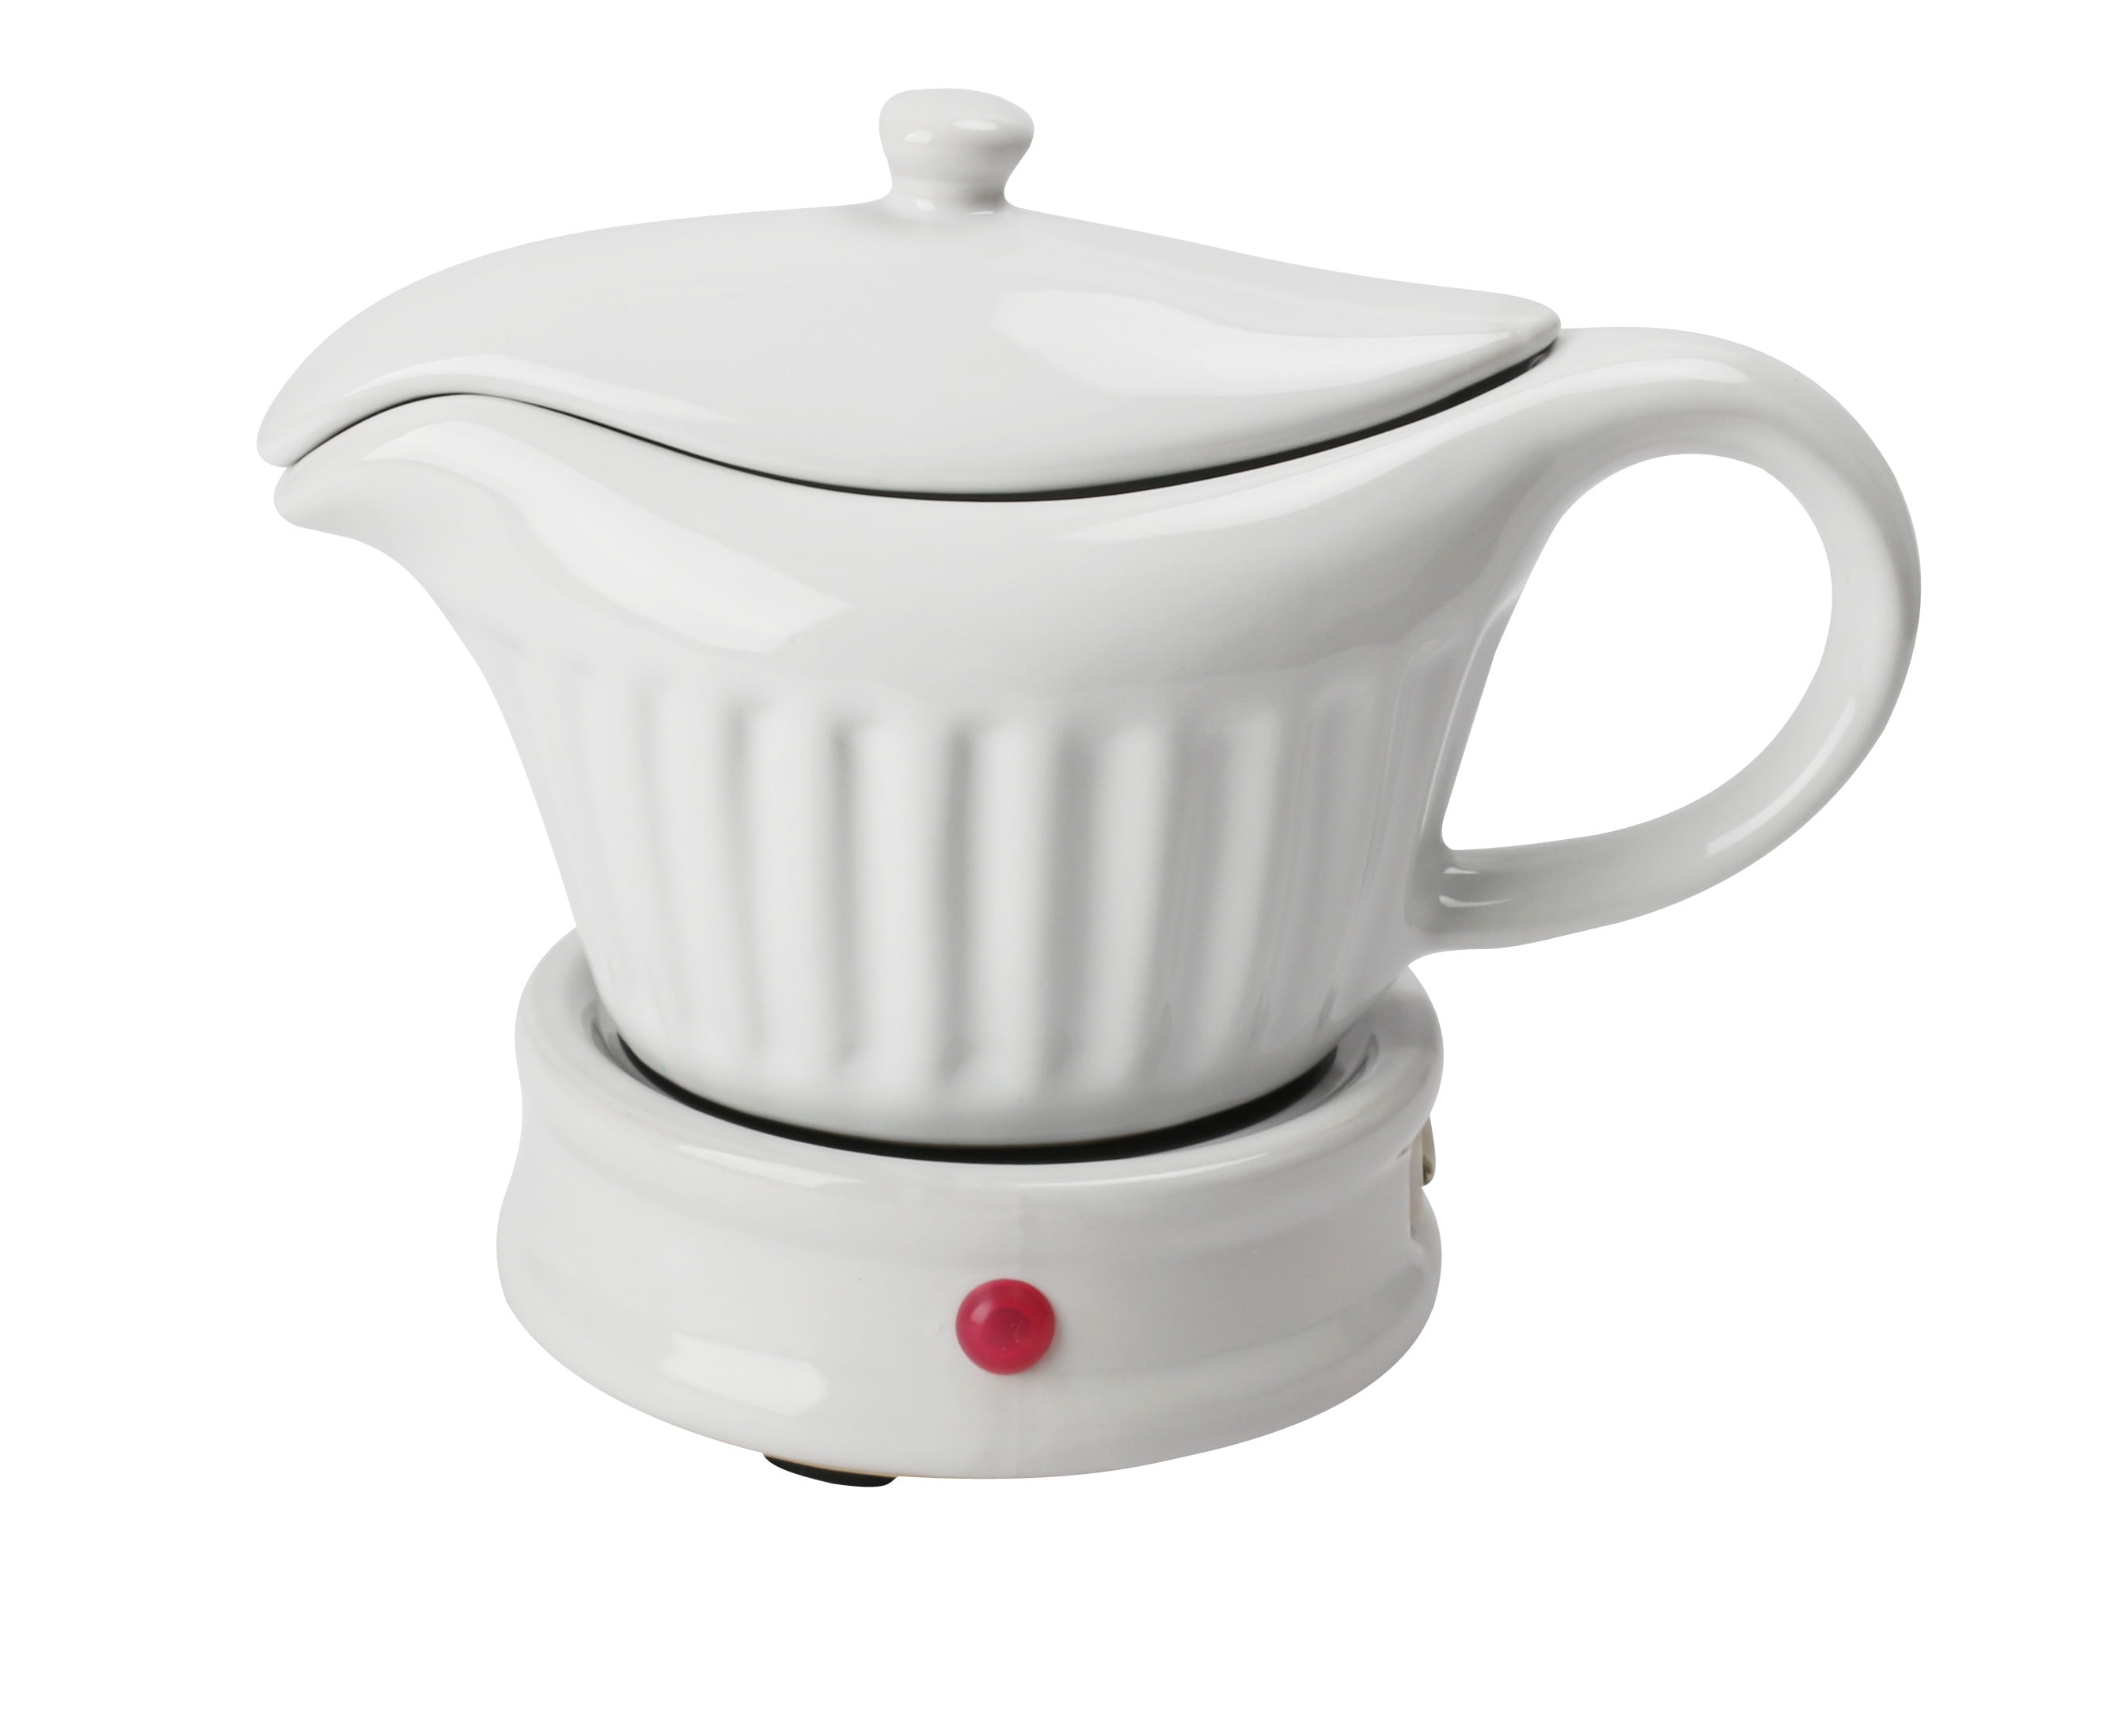 Deni Promotional Style Gravy and Syrup Warmer - White, Metal and Plastic, Easy Pour